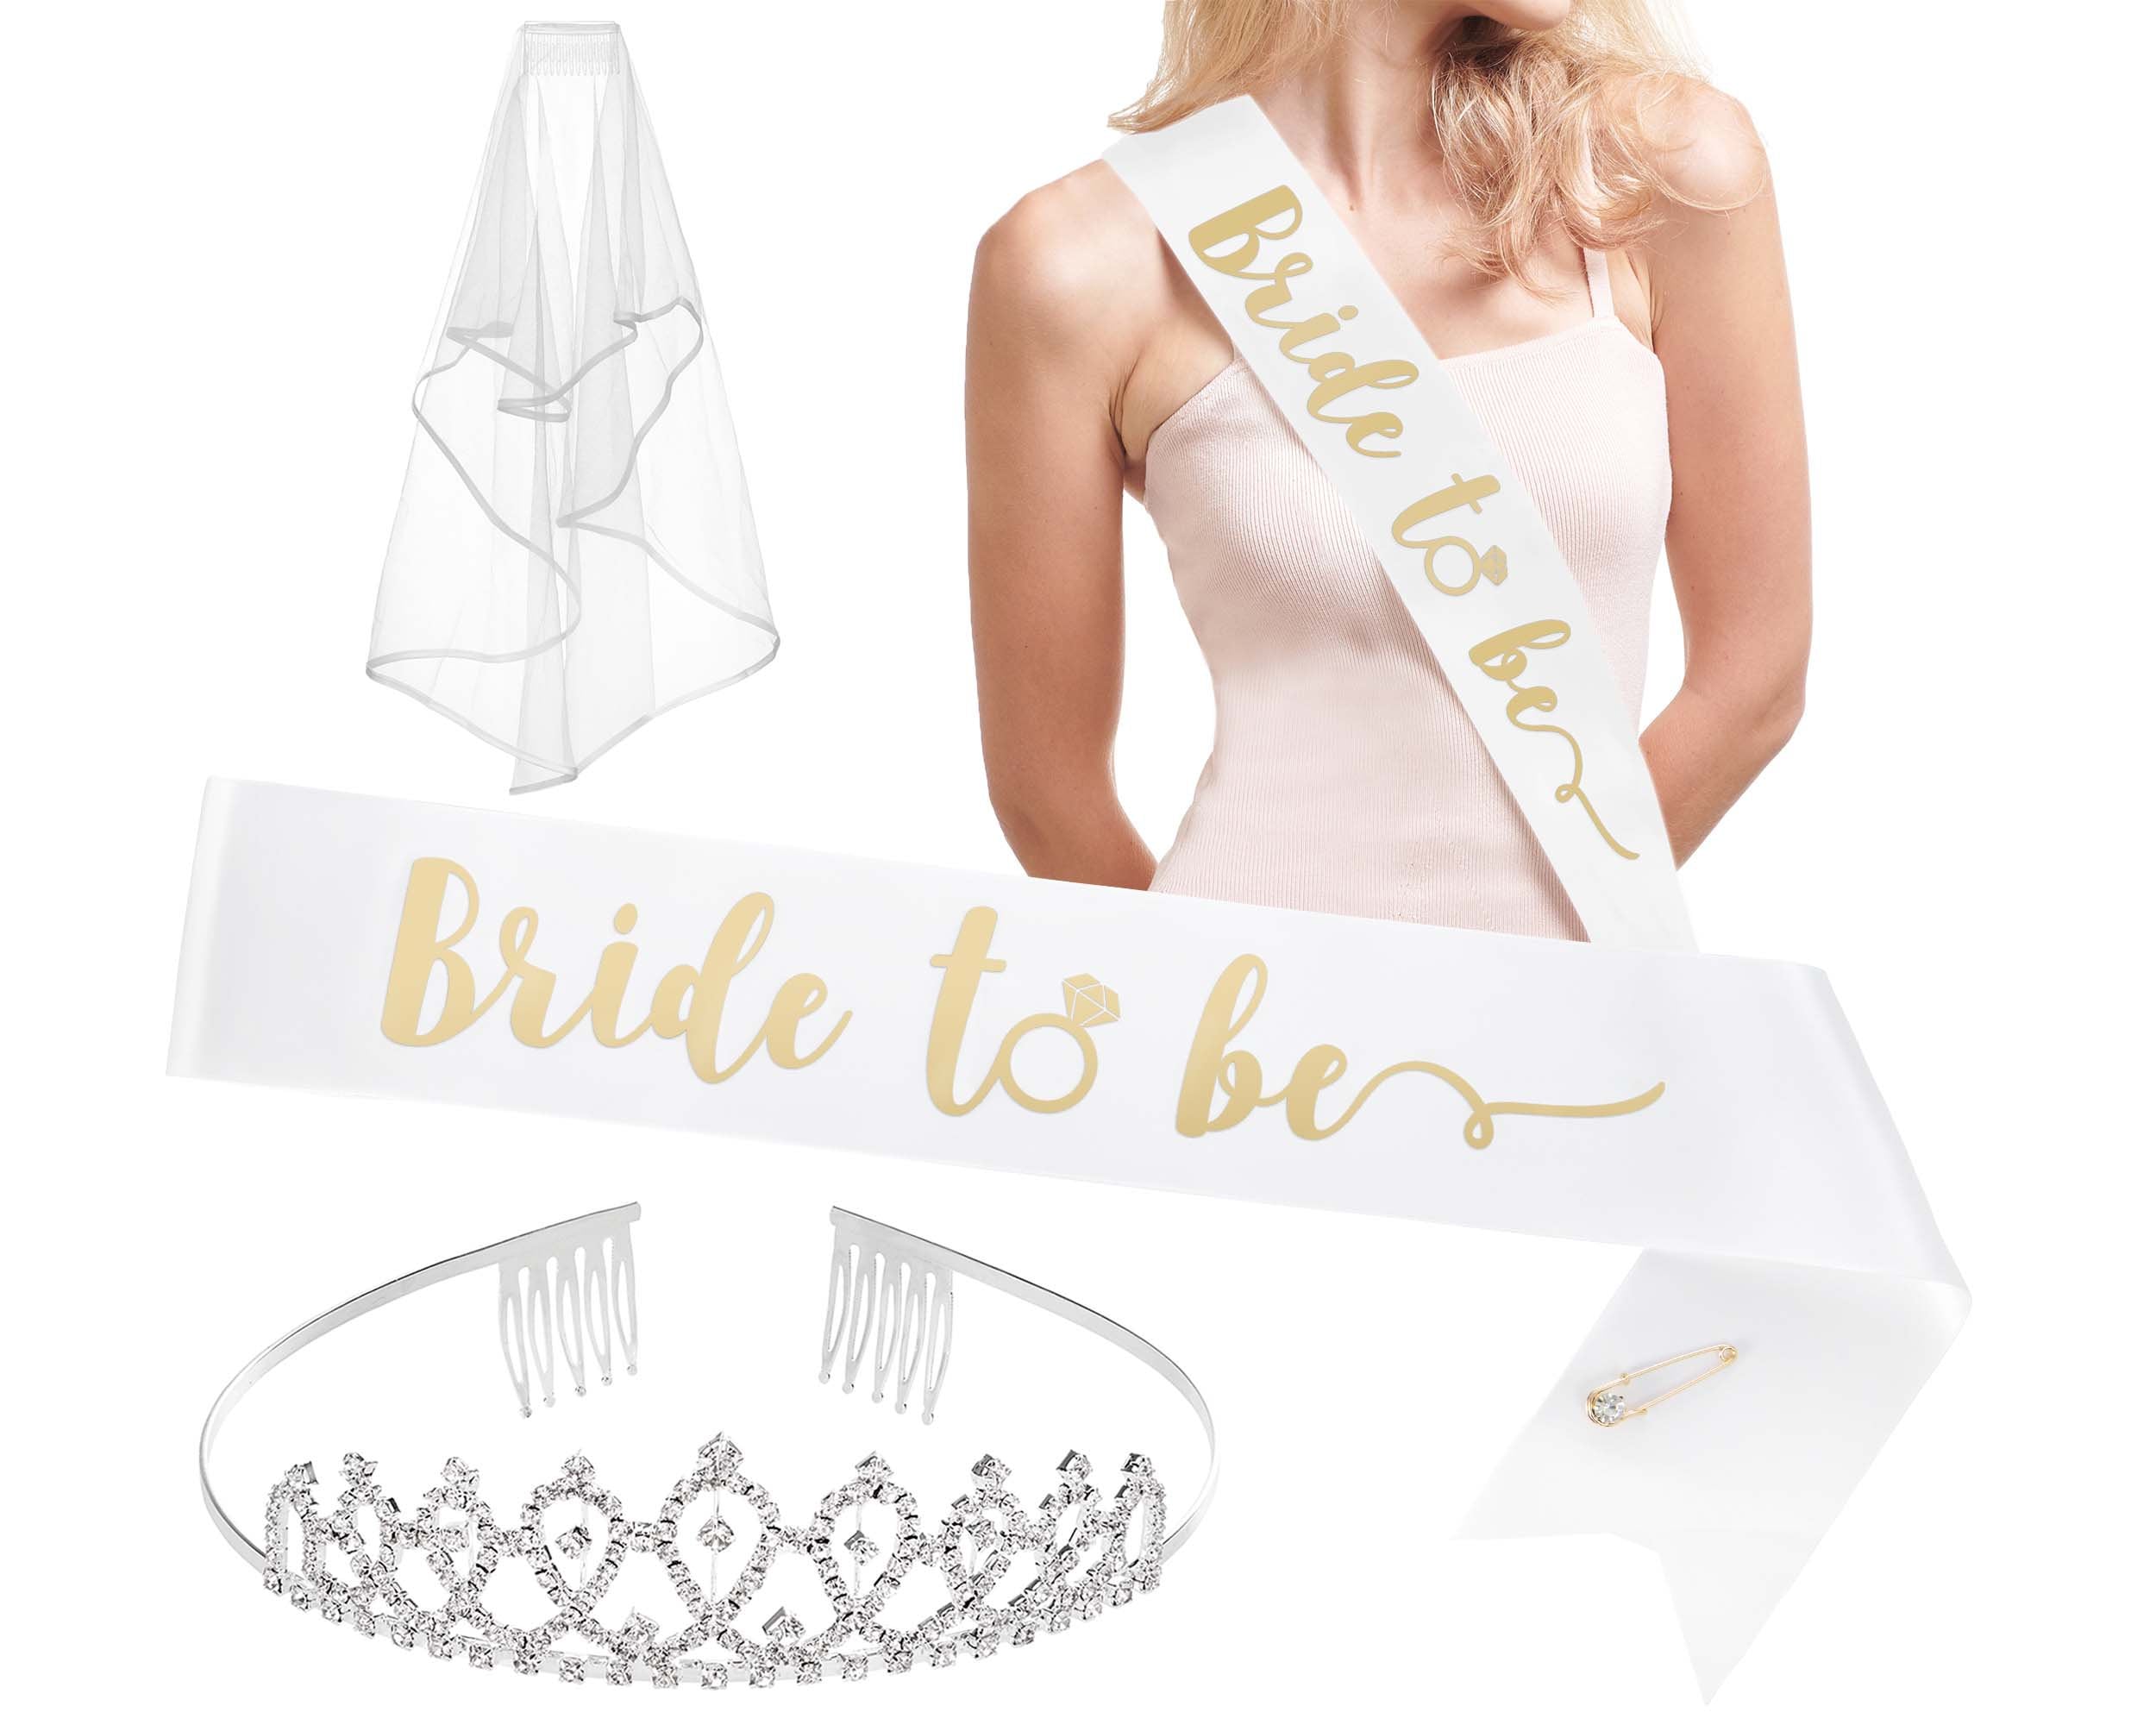 YULIPS Bride to Be Sash & Shoulder Length Veil - Bridal Accessories for  Bachelorette Party Bridal Shower Hen Party